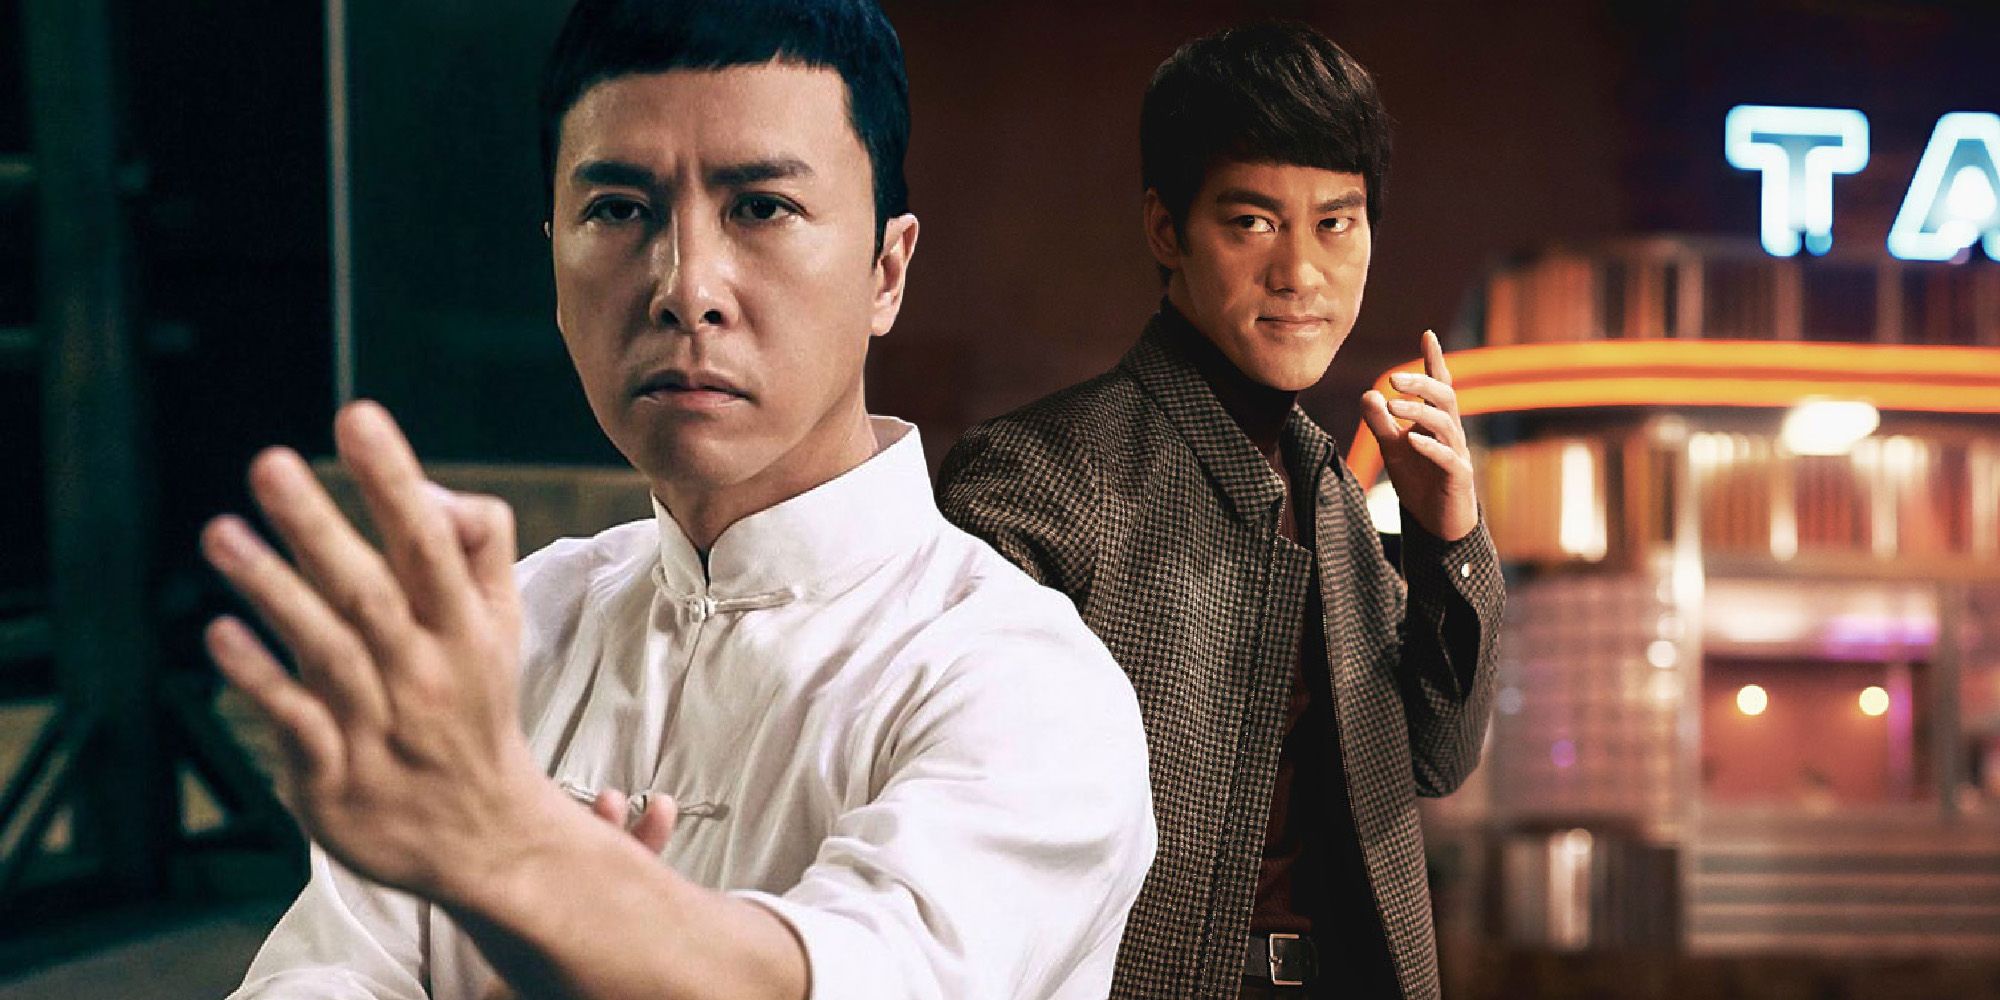 Ip Man What The Martial Arts Movies Omitted About Bruce Lee (& Why)